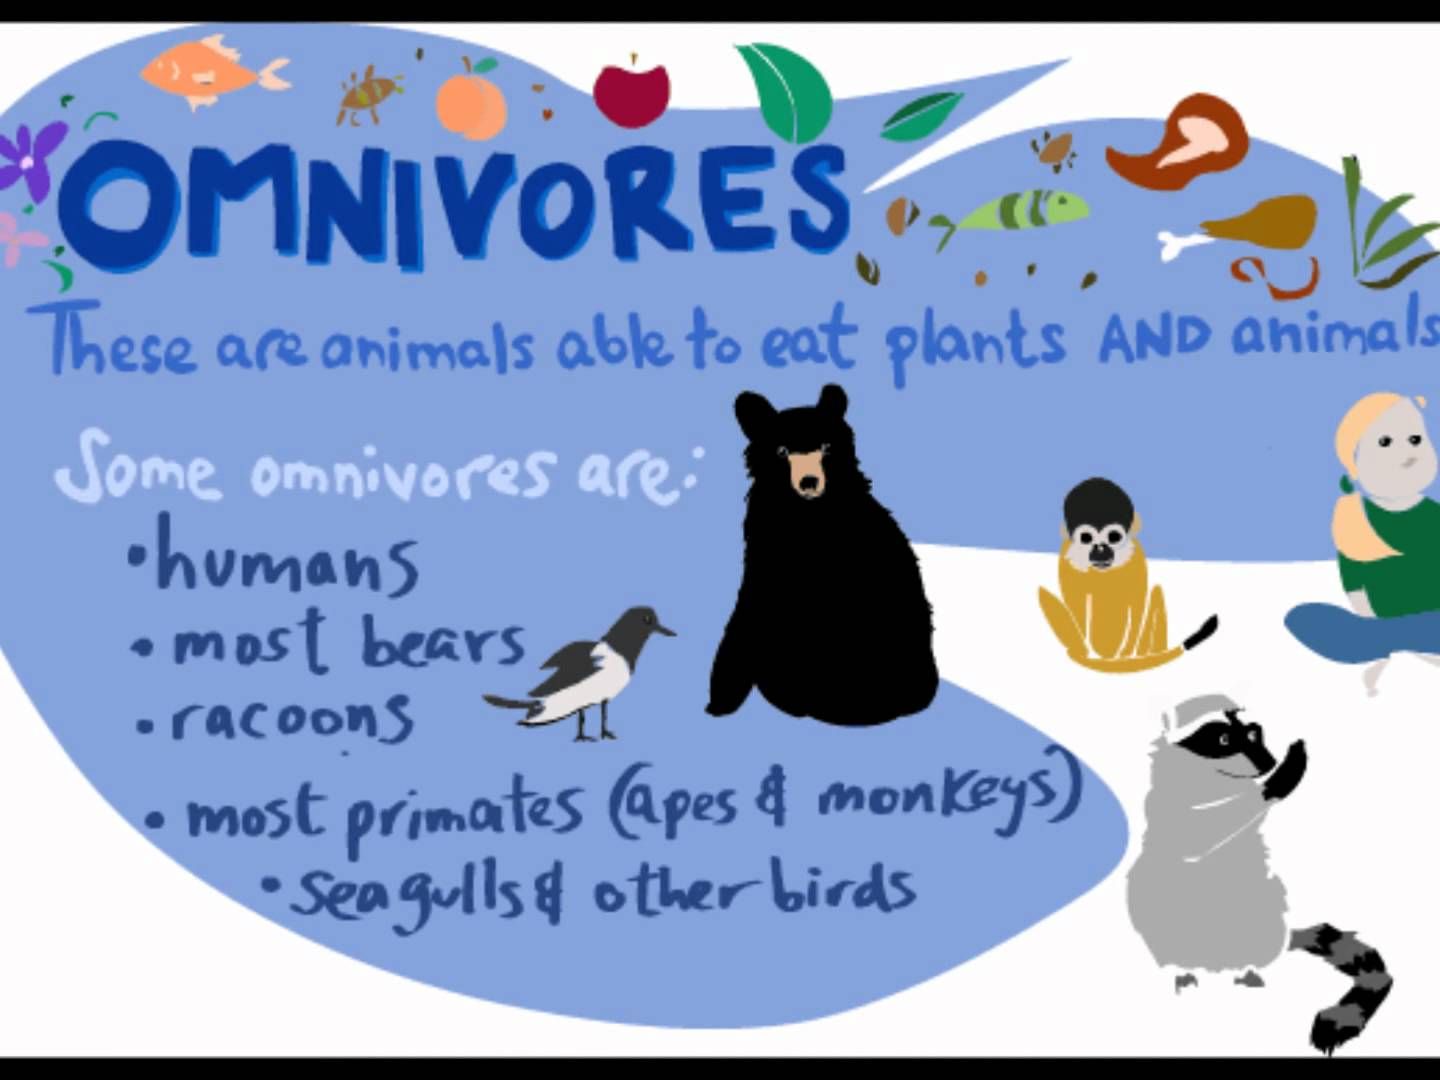 How to Be an Ethical Omnivore